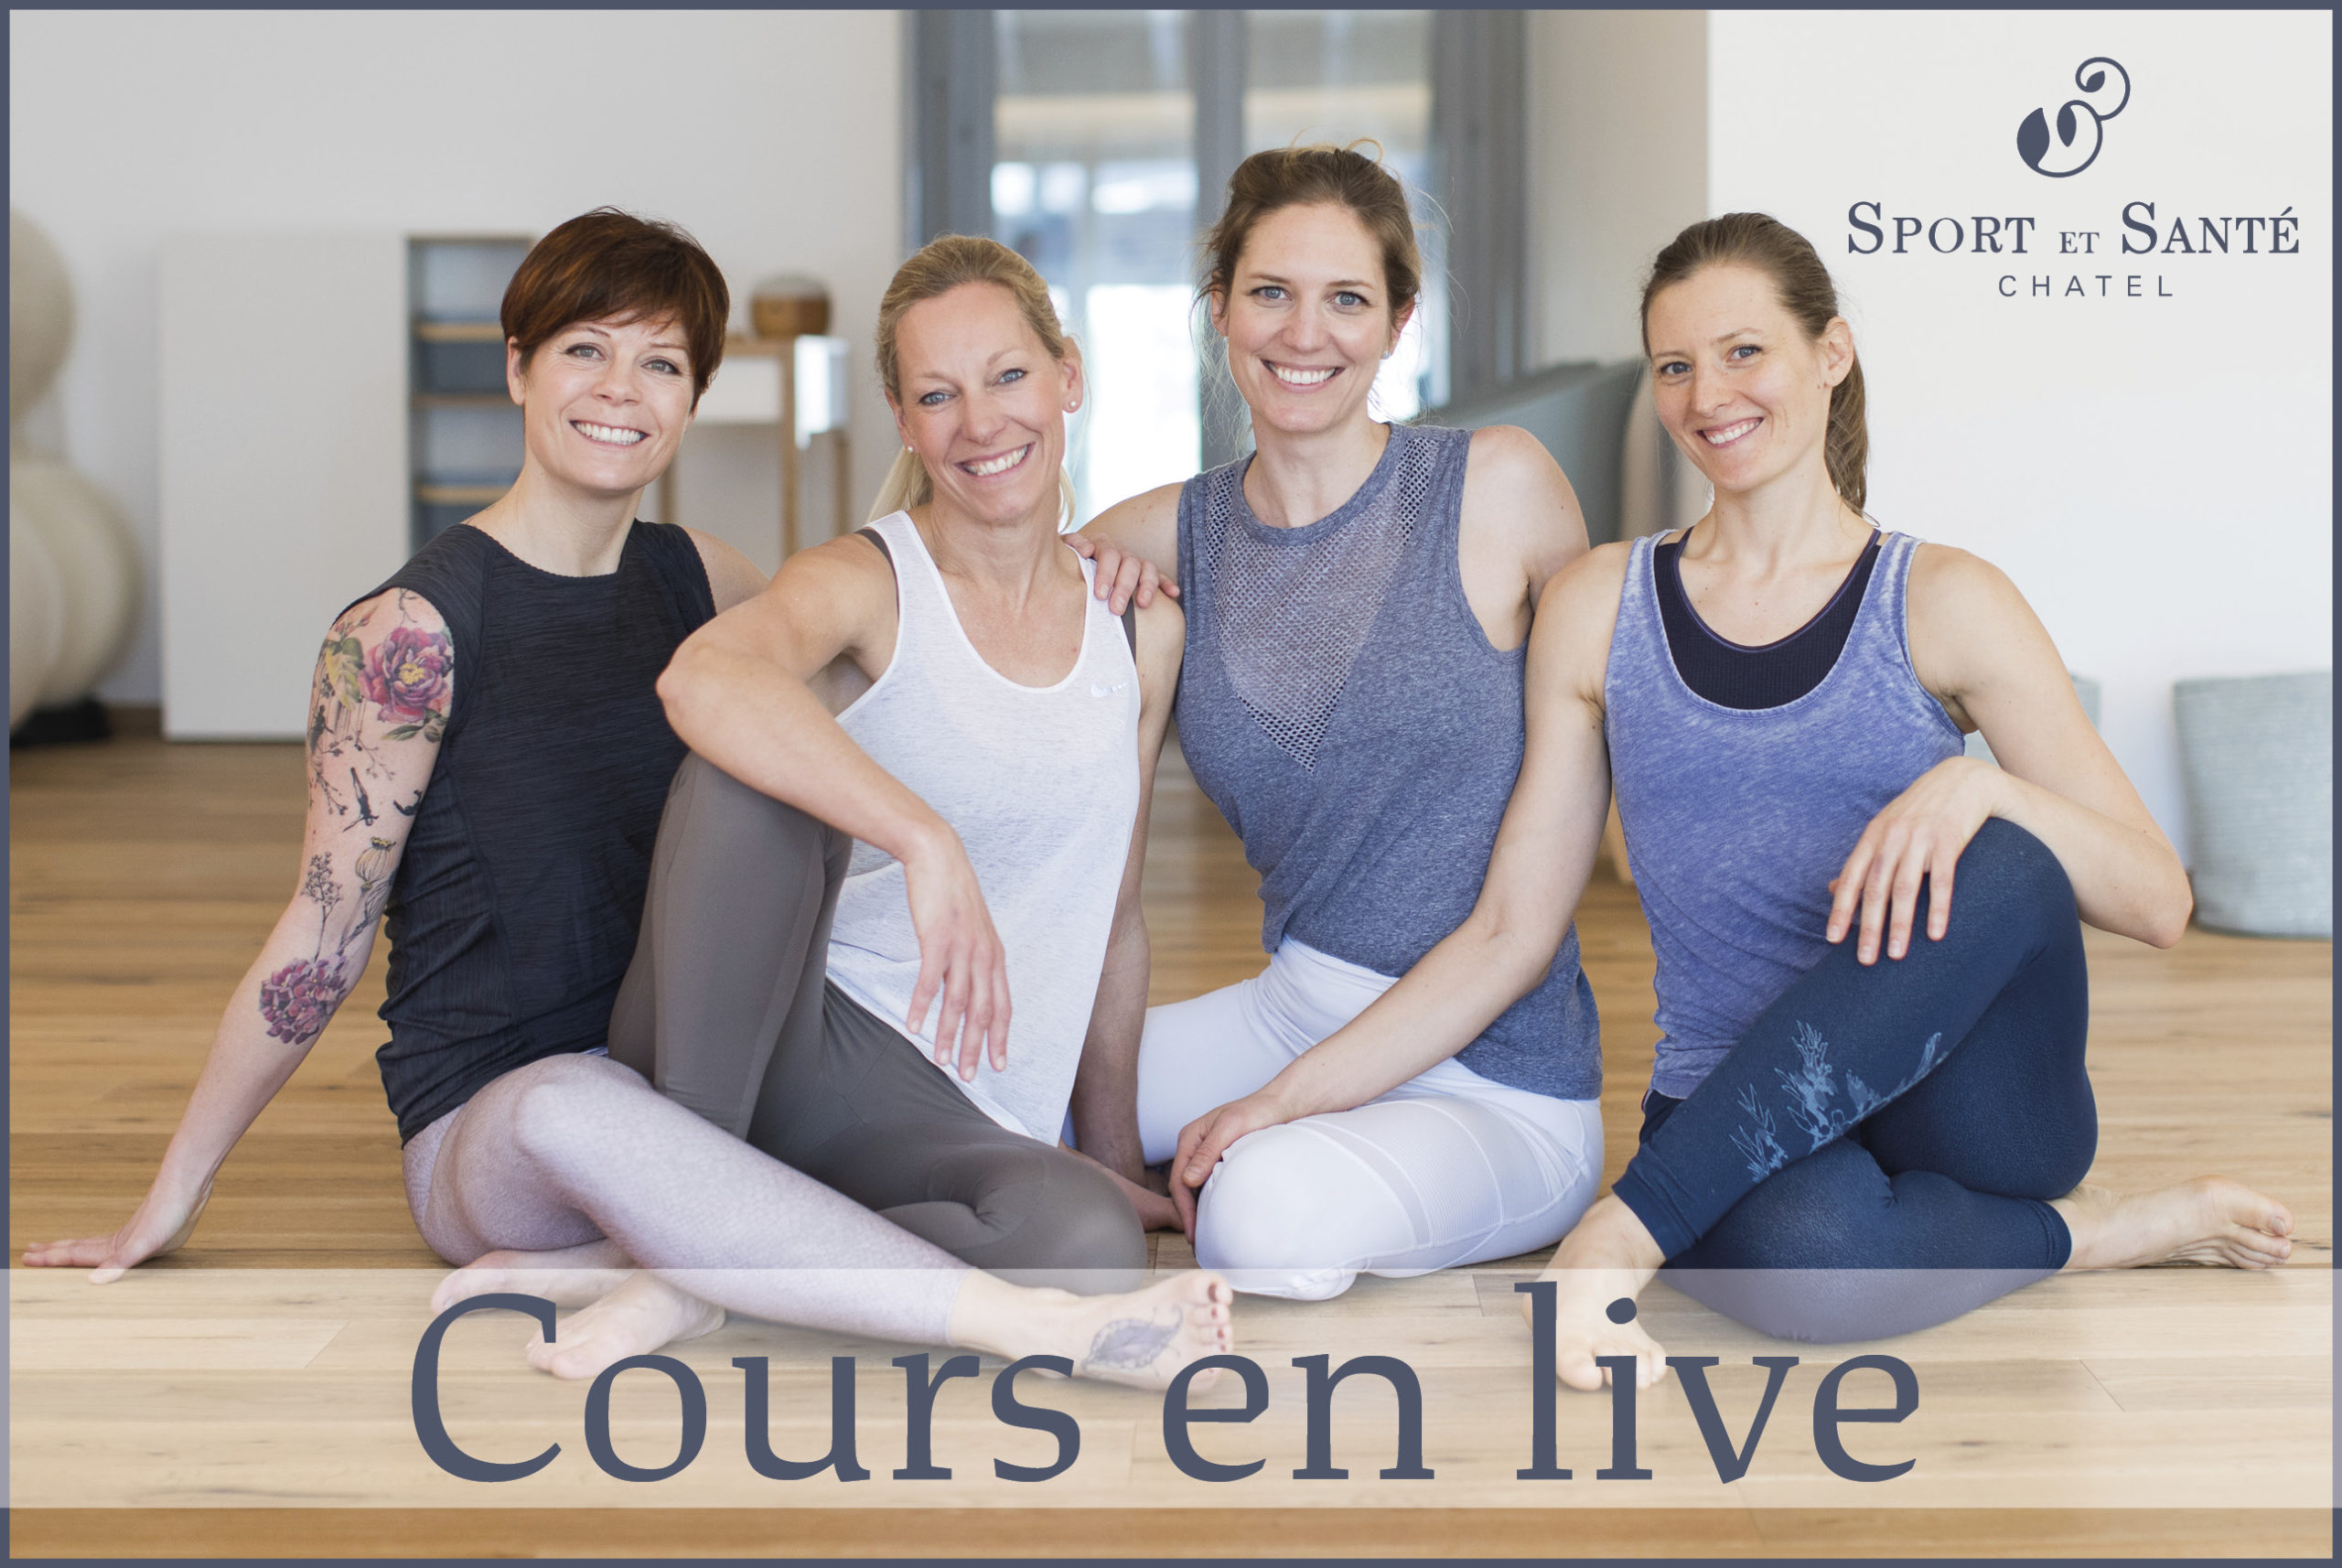 You are currently viewing Le planning de Pilates cette semaine